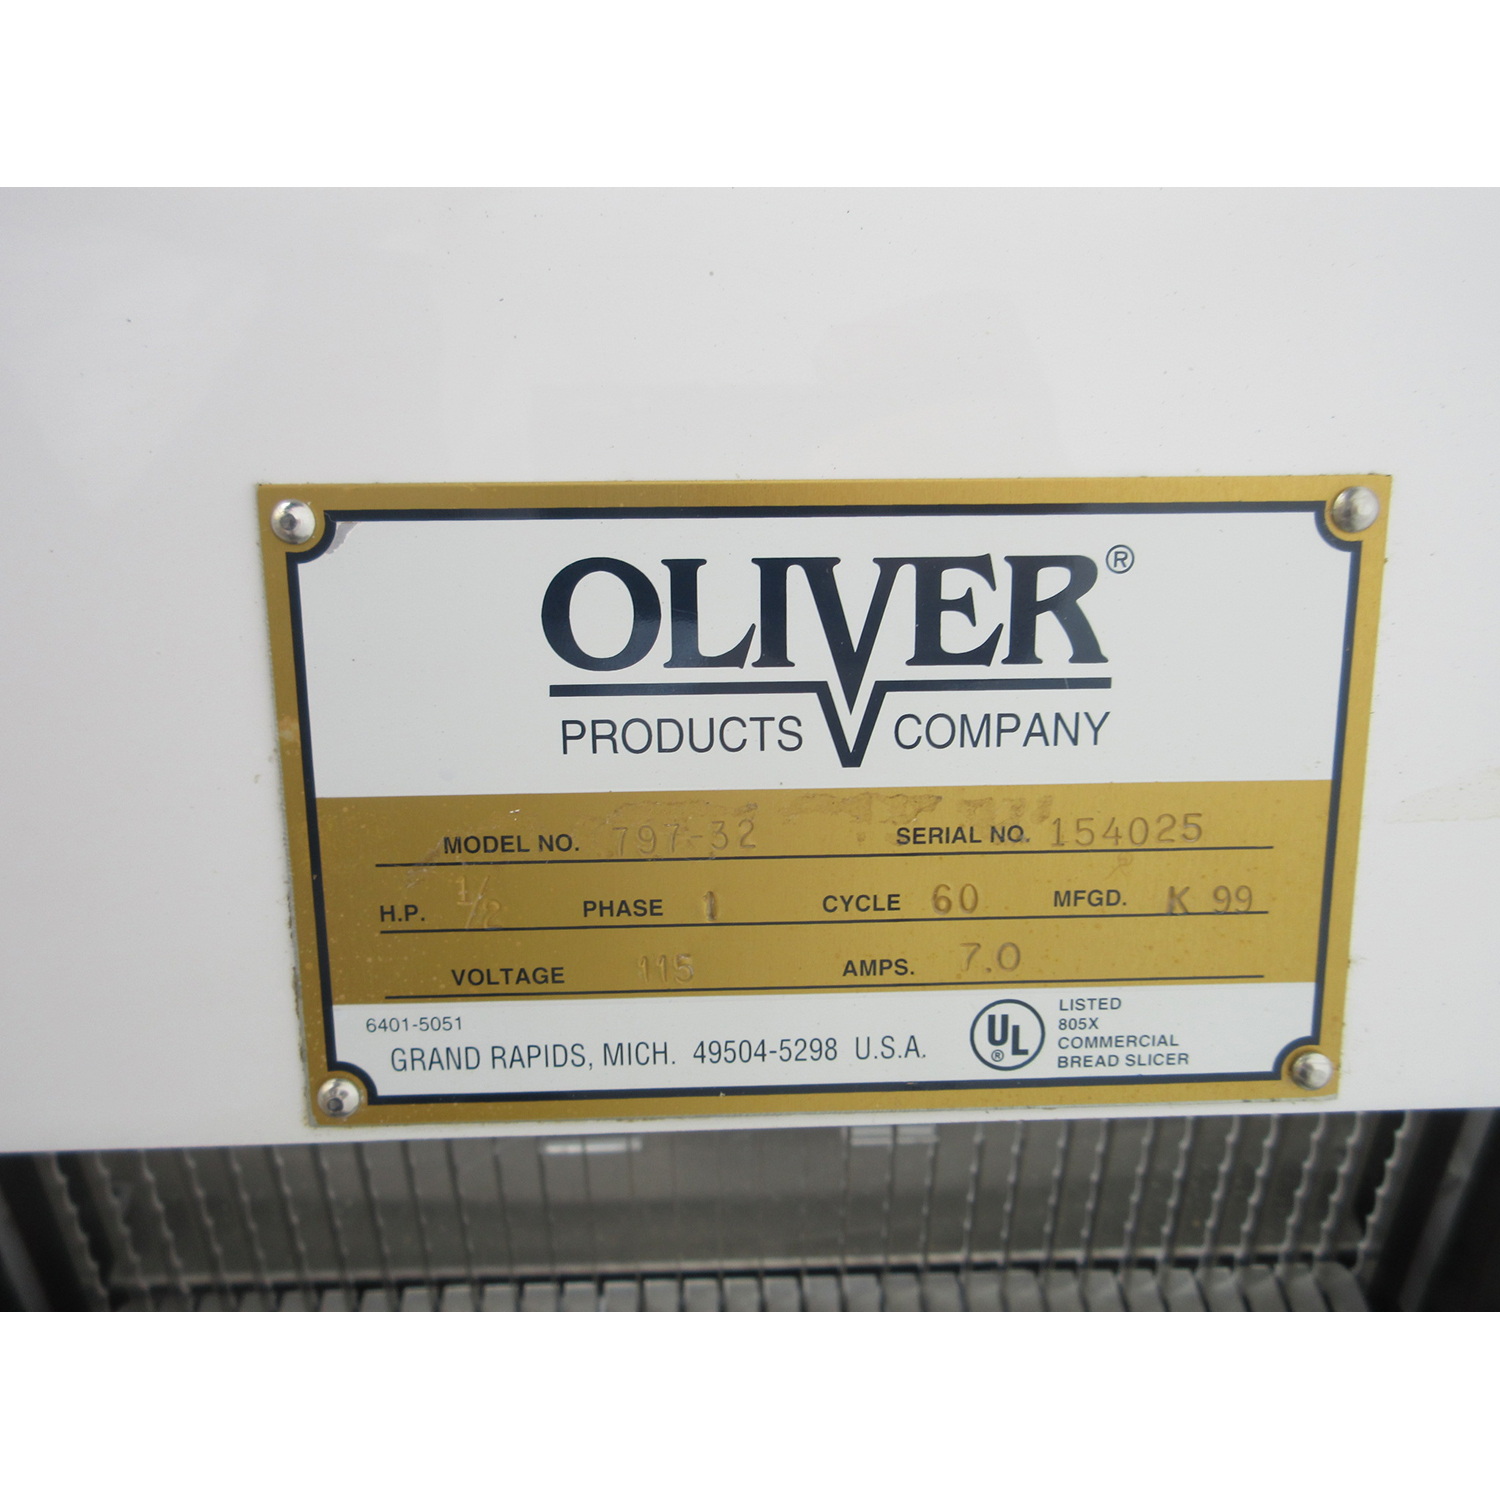 Oliver 797-32 Bread Slicer 1/2 Cut, Used Excellent Condition image 4